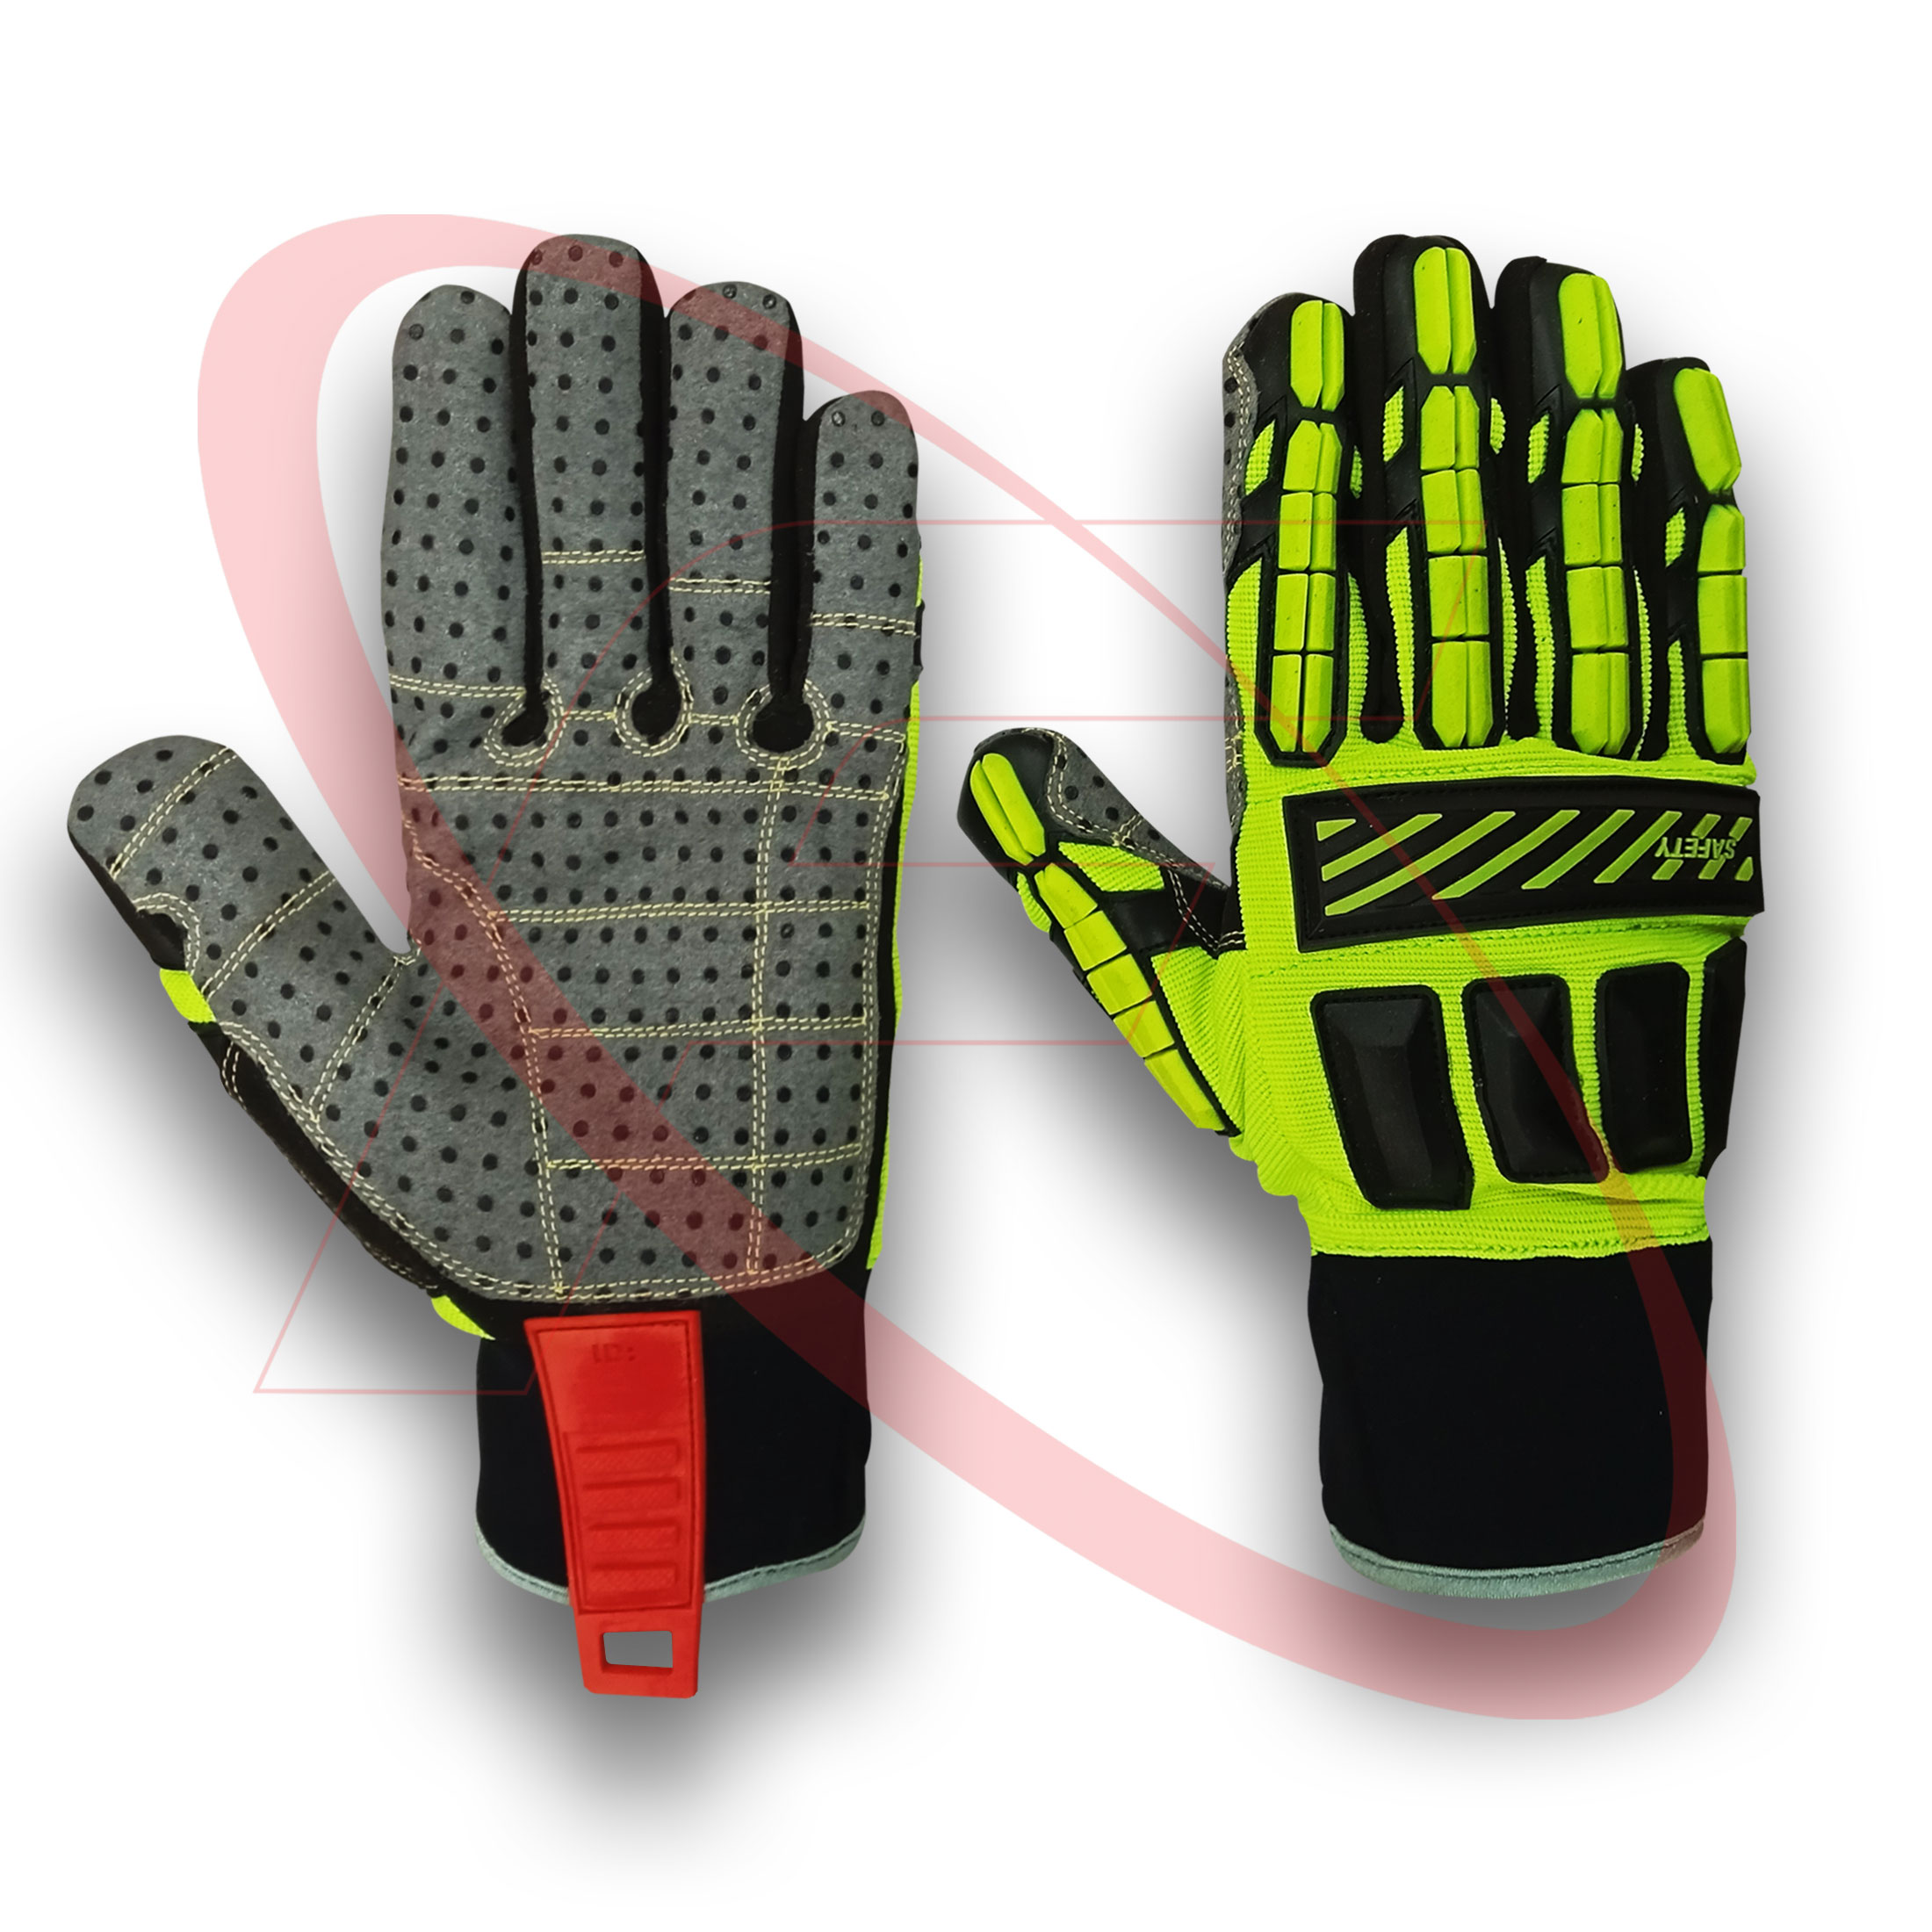 Impact Protective Mechanic Safety Gloves for Industrial Mechanical Work Non-Slip Synthetic Leather Anti Impact Gloves